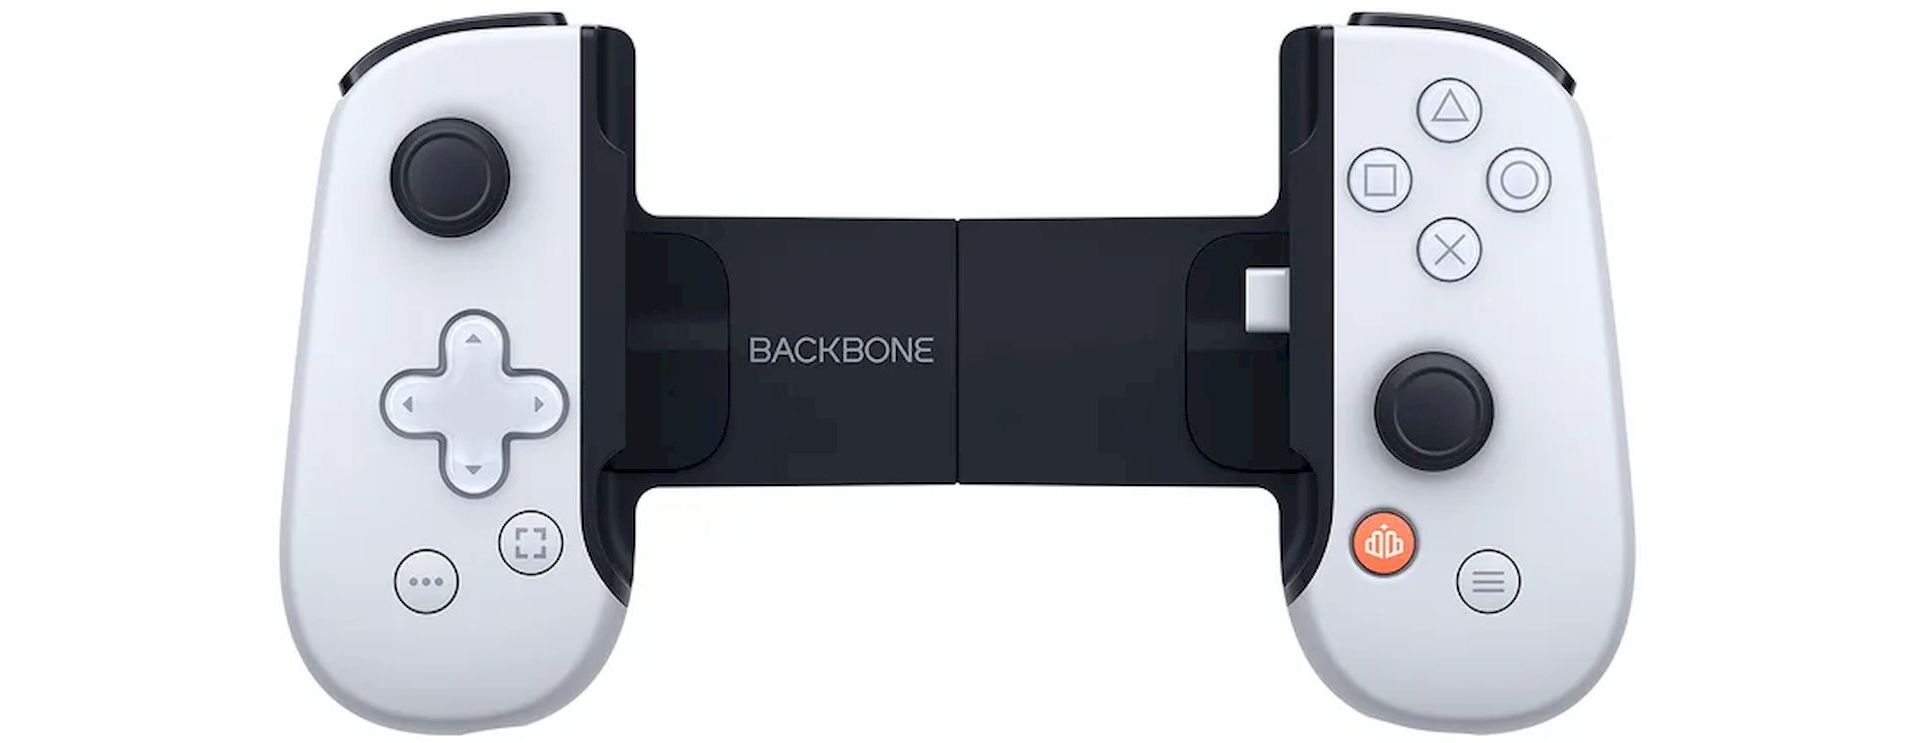 Backbone One PlayStation Android: Specs, price, and release date